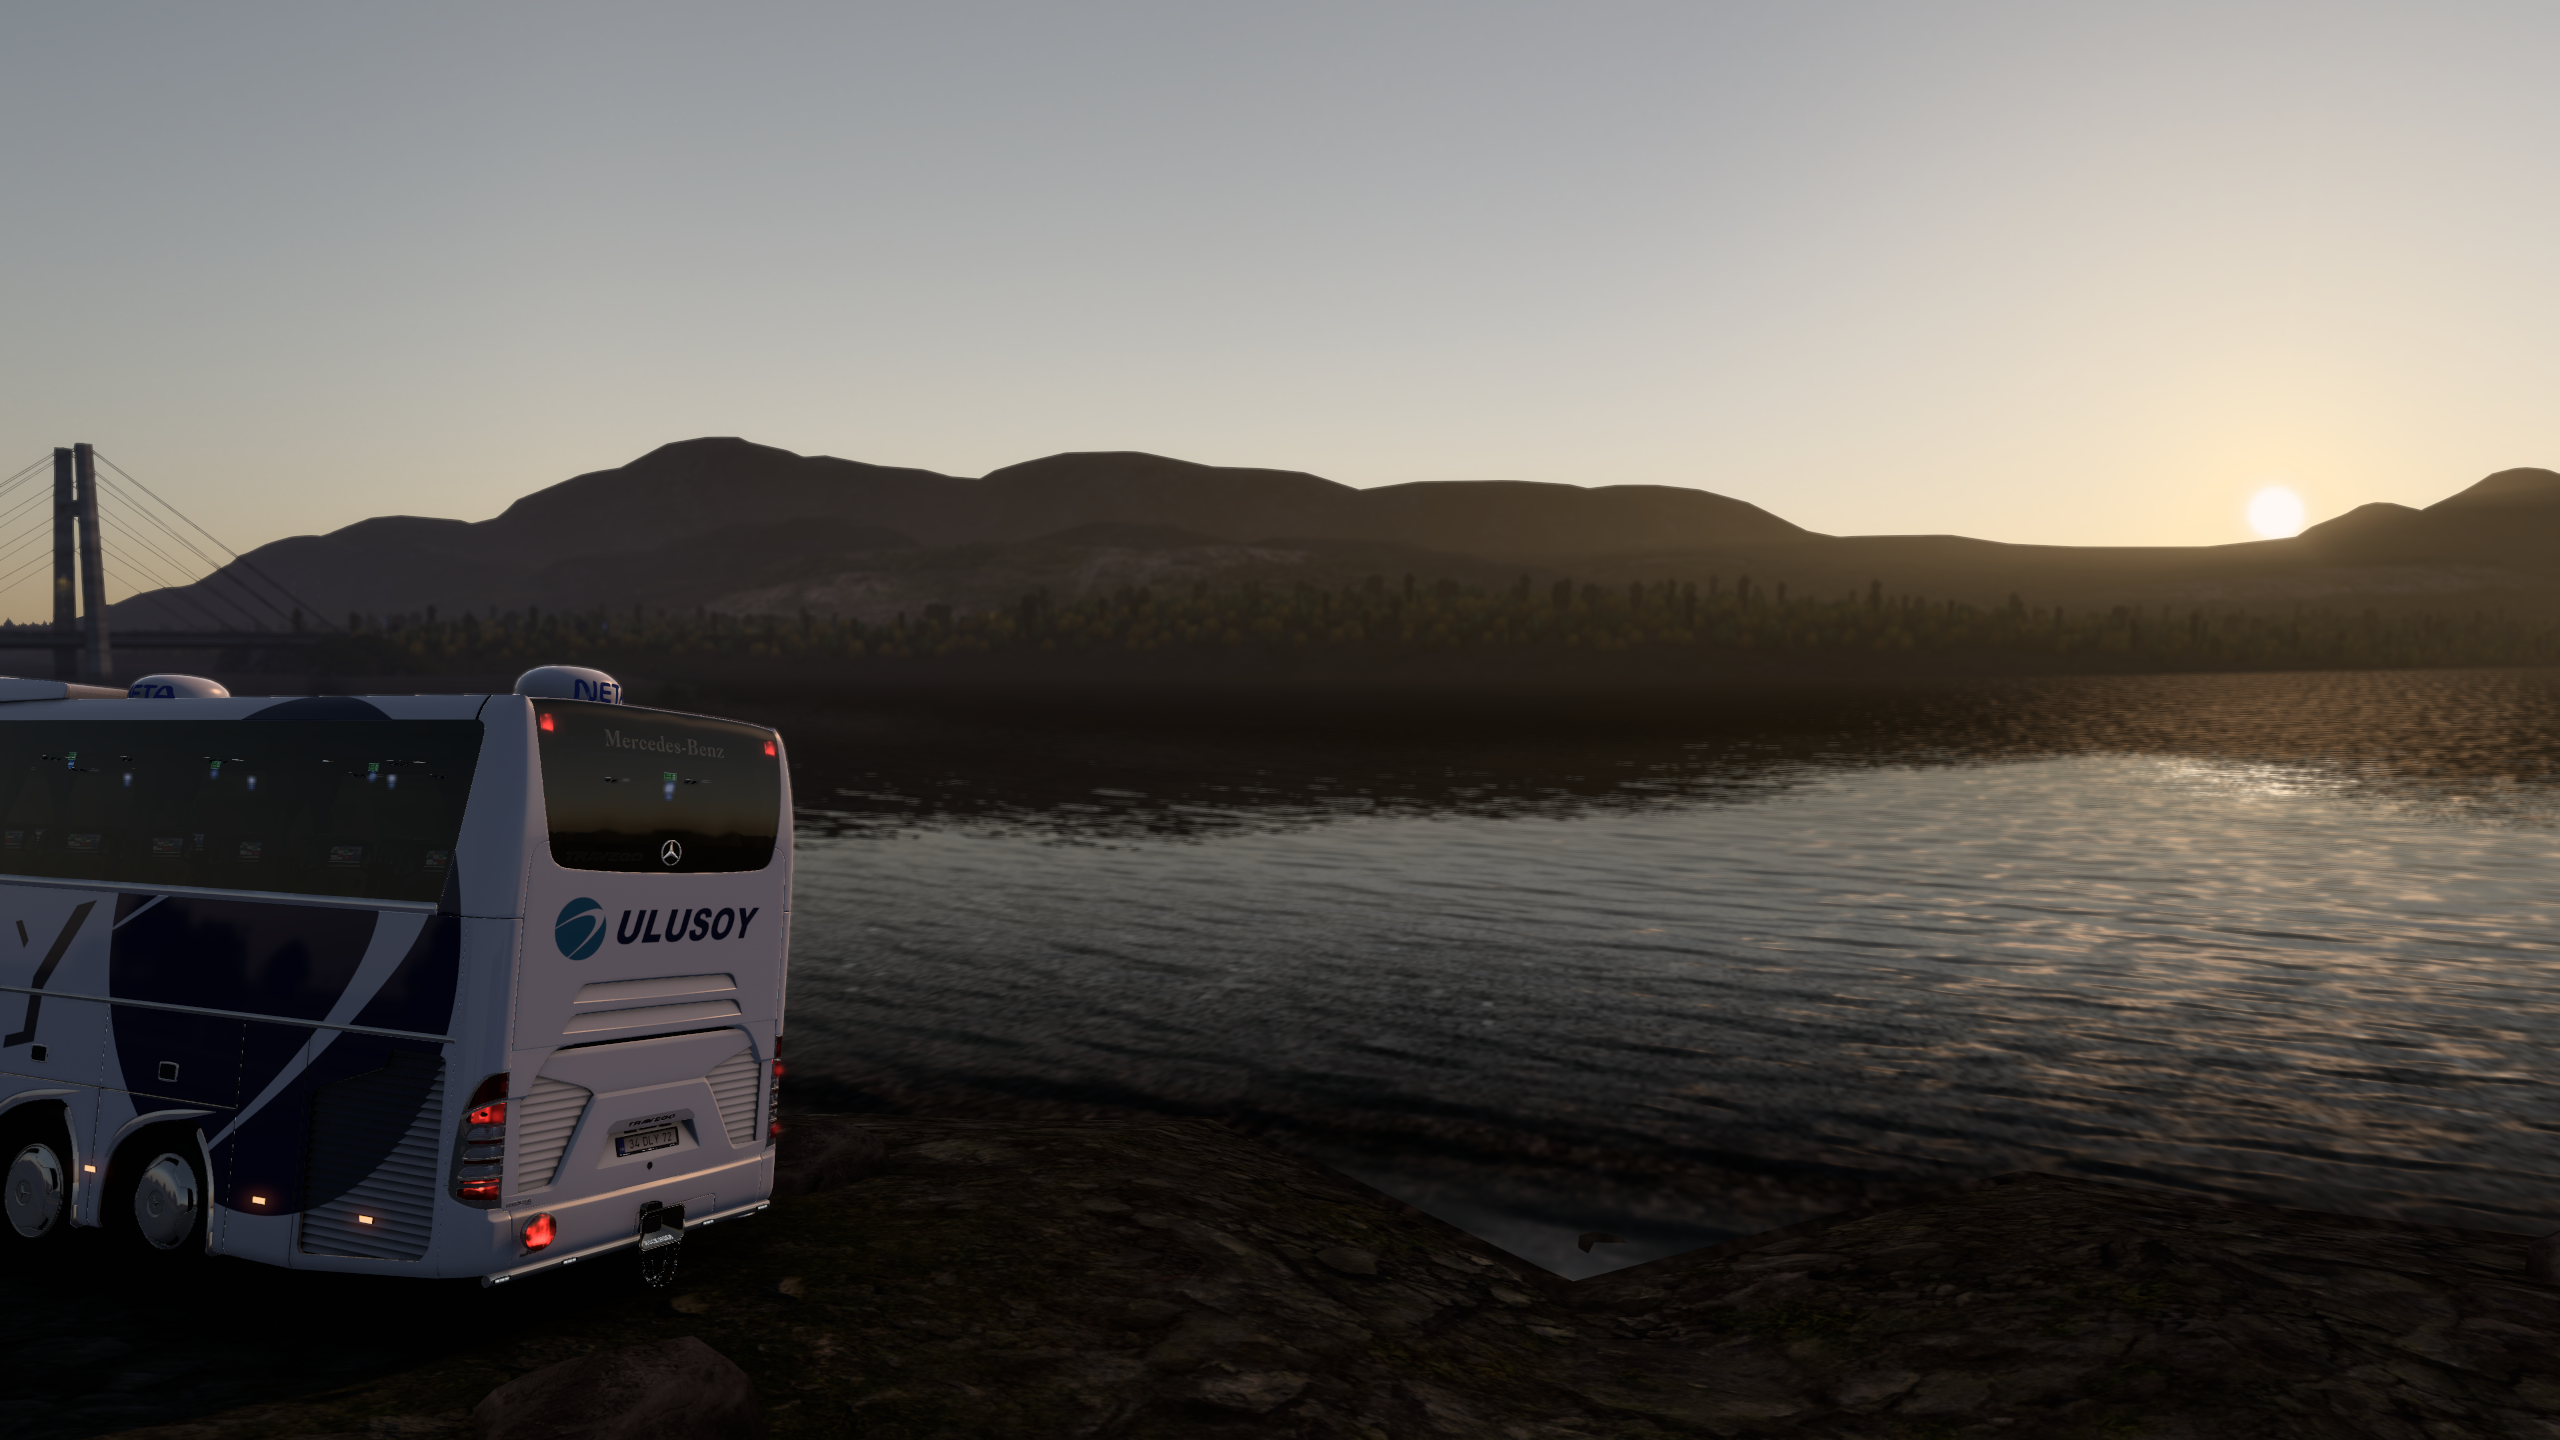 ets2_20211027_234800_00.png